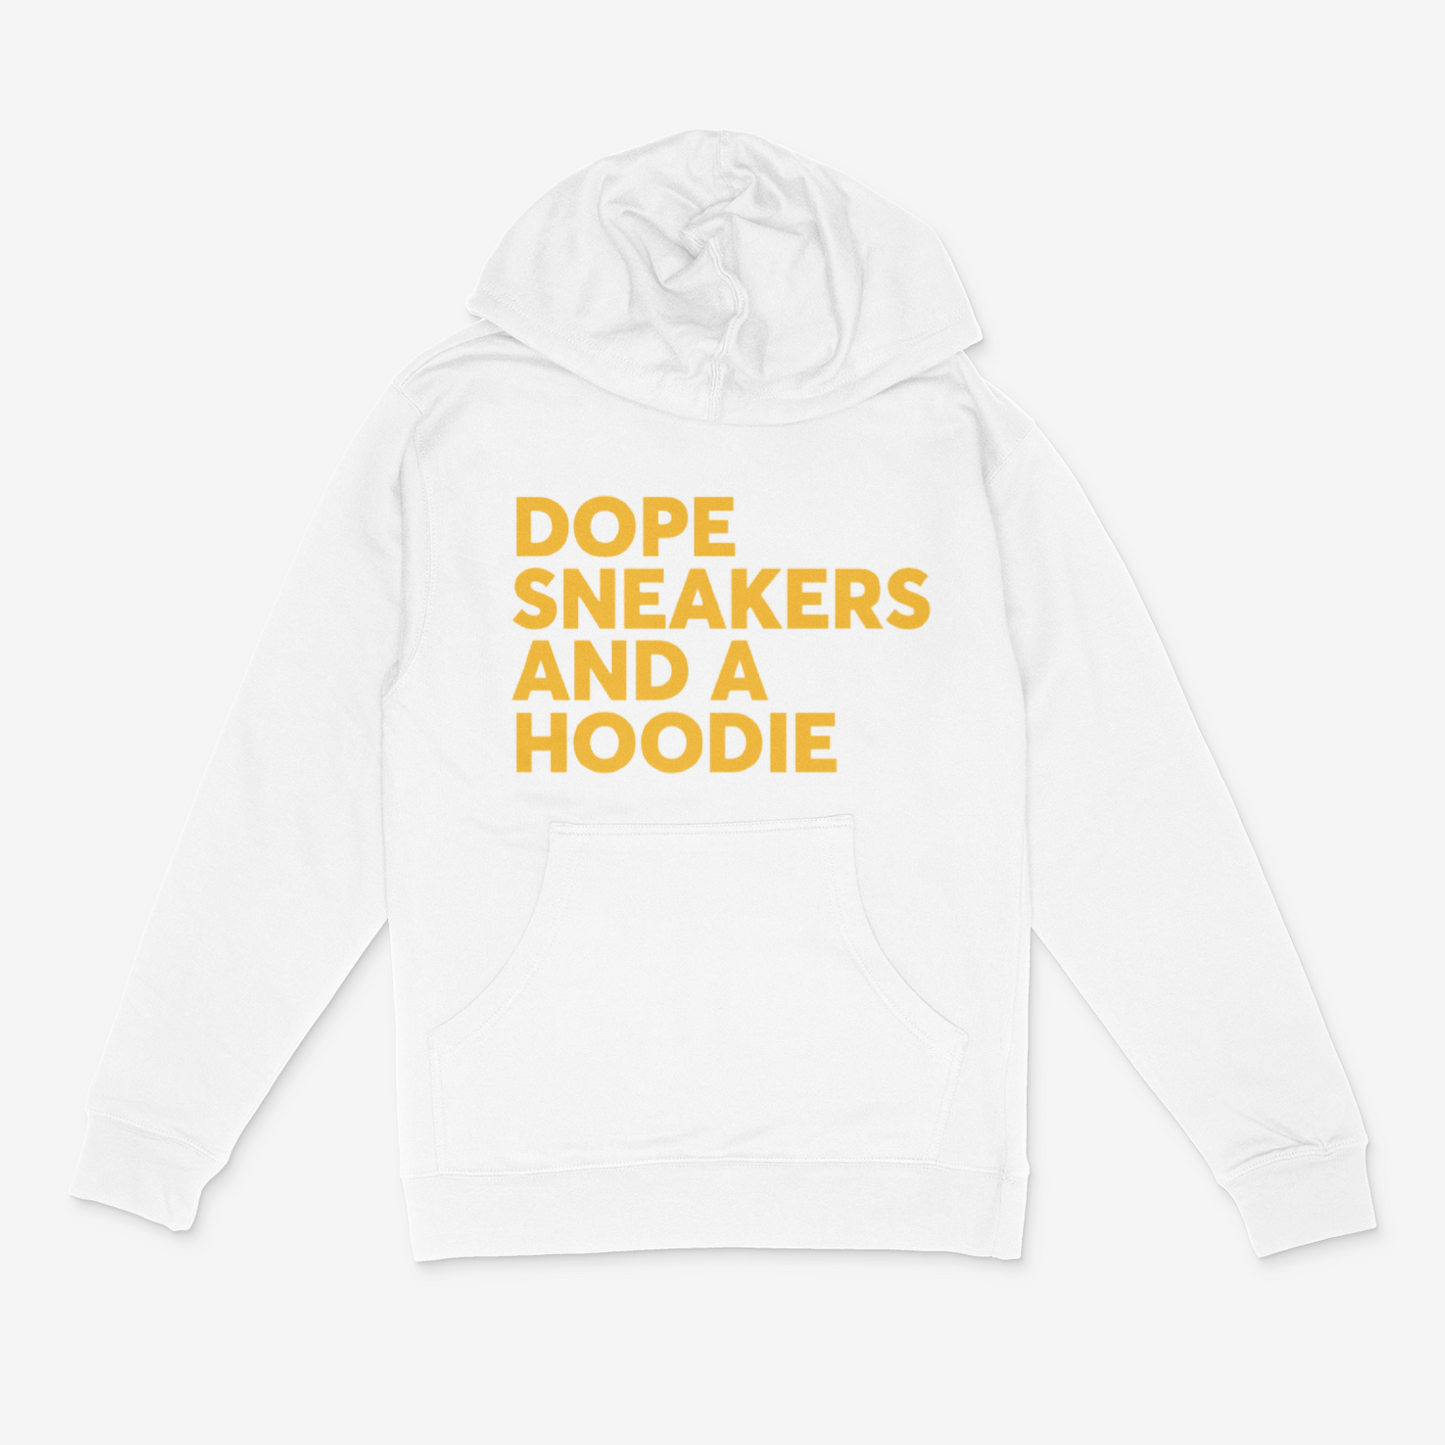 Dope Sneakers and a Hoodie (Gold)